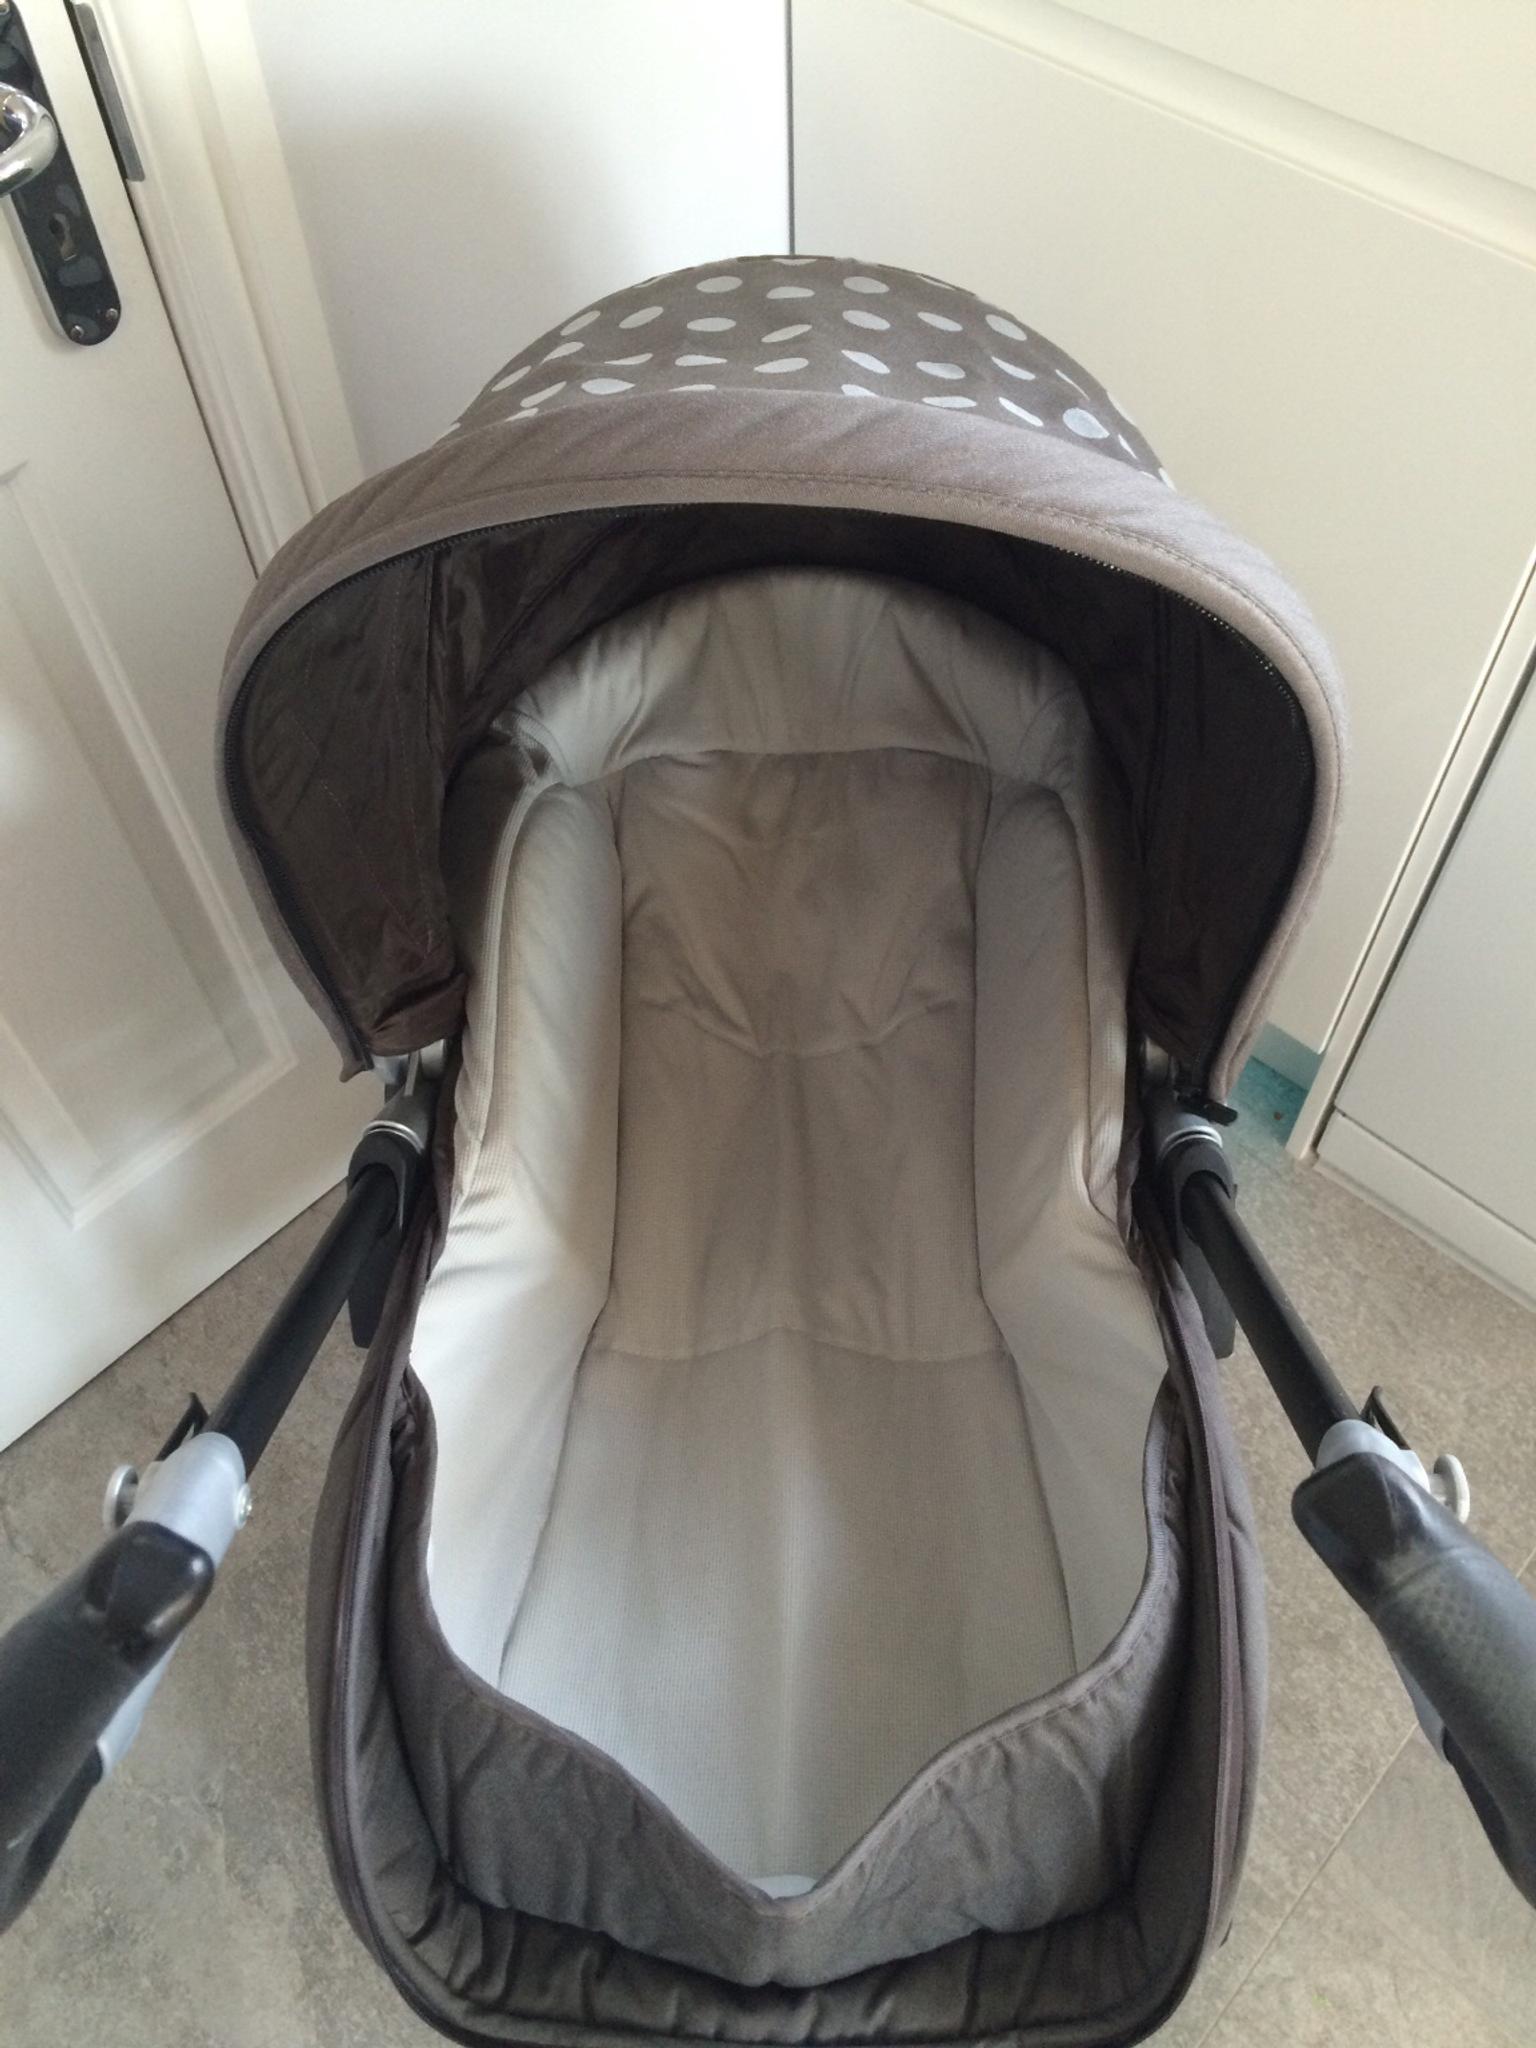 mamas and papas swirl pushchair instructions